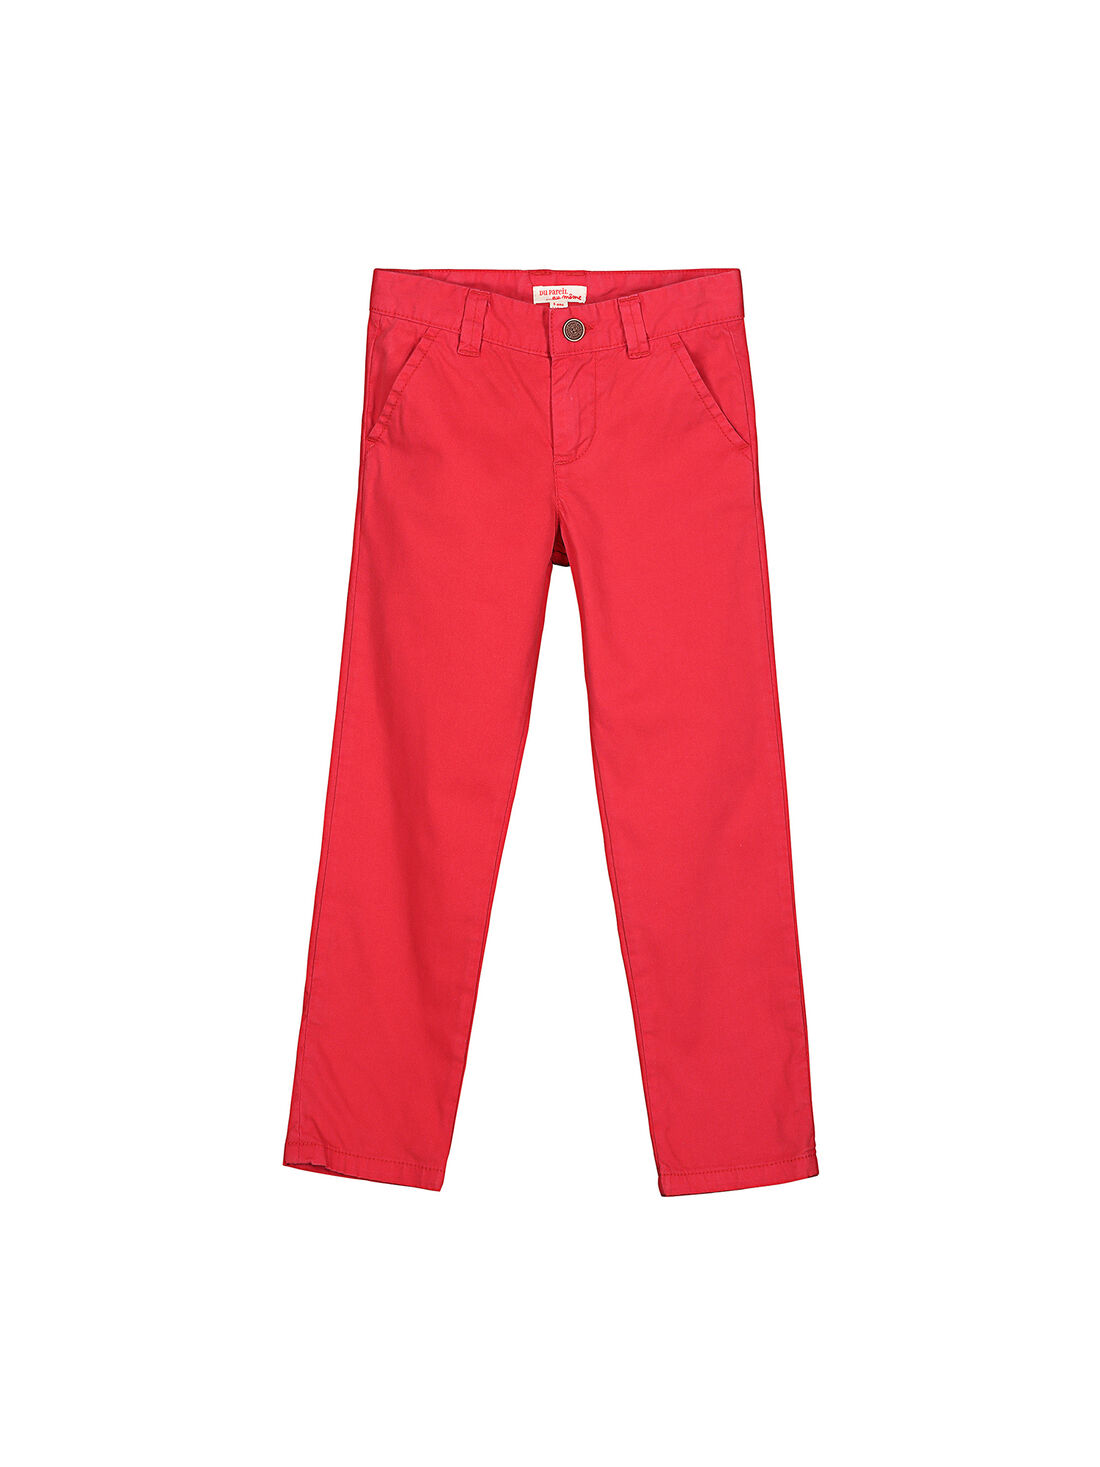 Boys' chino trousers for children for 